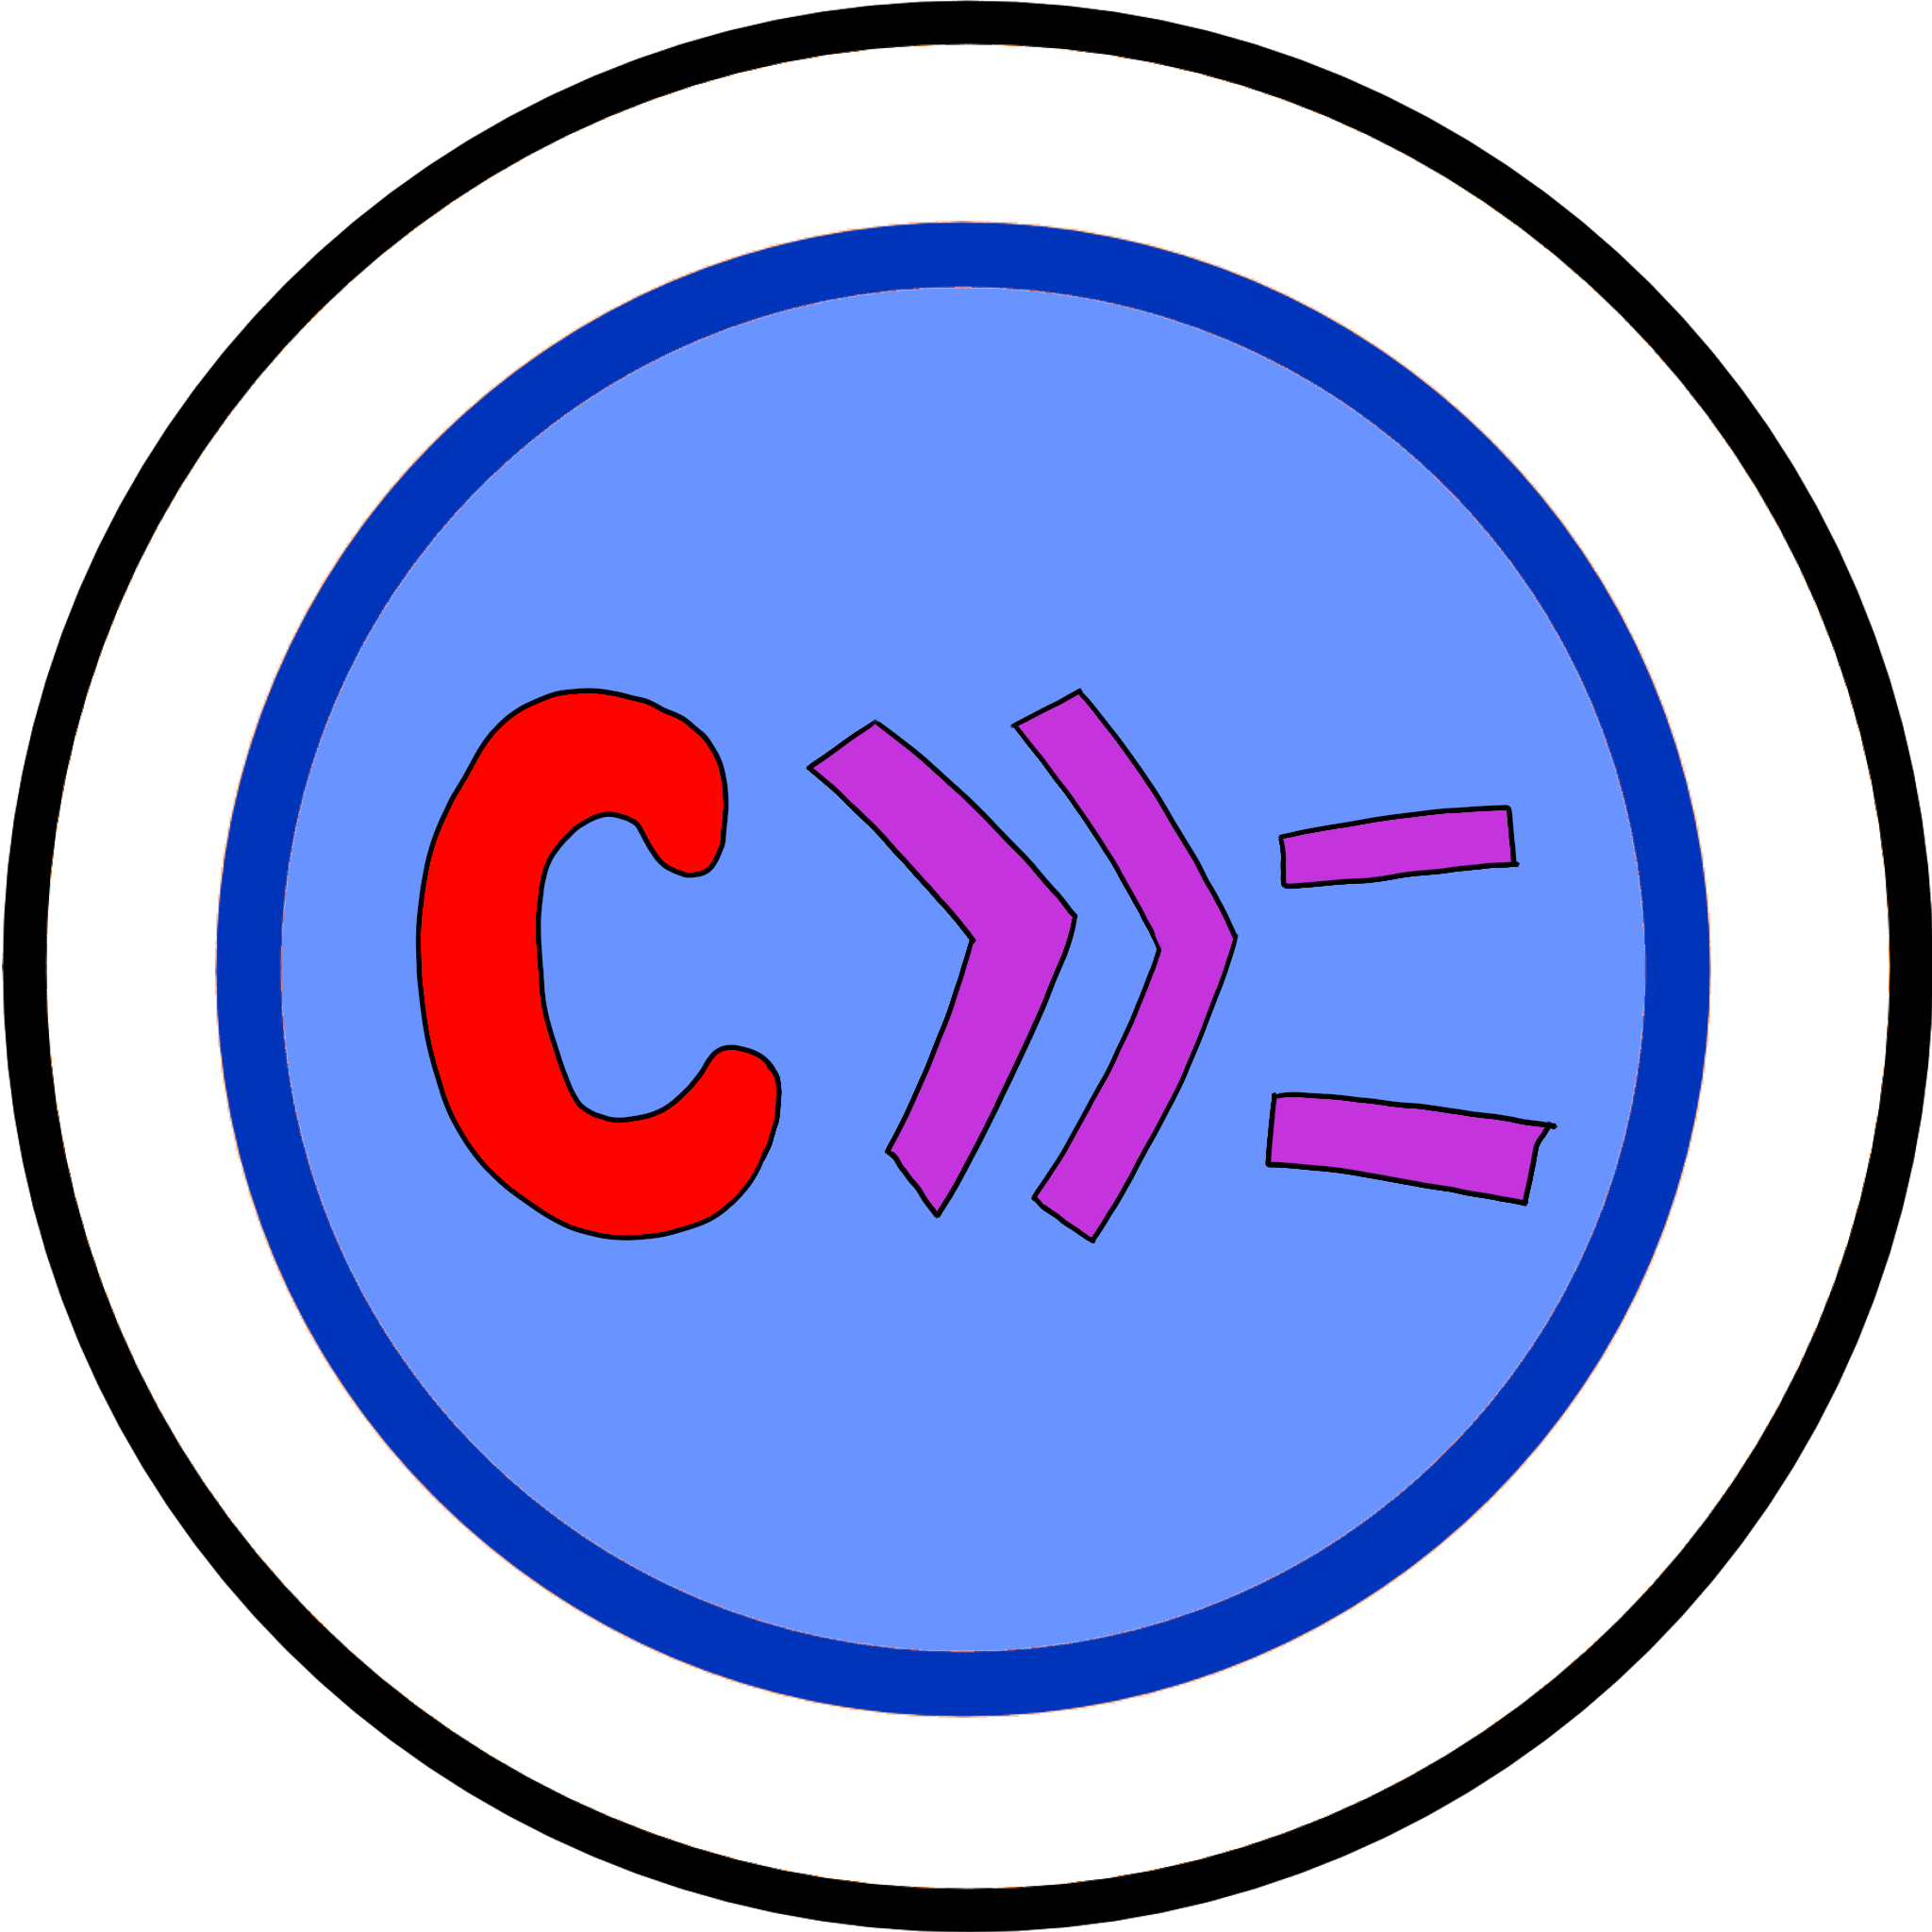 A small logo representing monadic-c-parsing - consist of a C character followed by the Haskell monad bind operator.